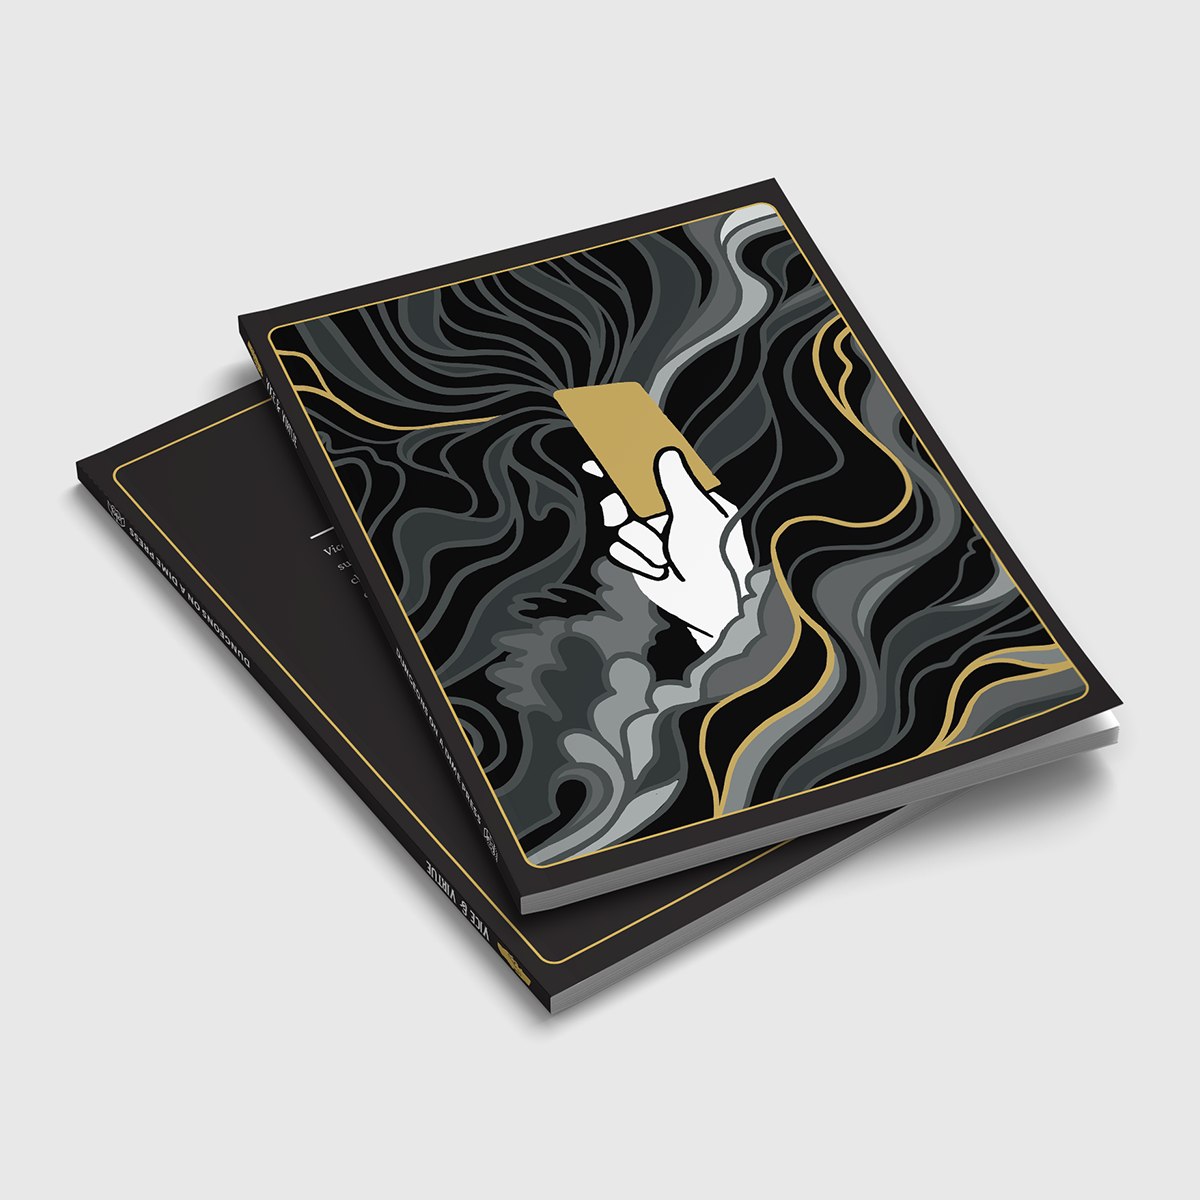 Image shows two copies of Vice &amp; Virtue stacked on top of each other. The cover shoes a white hand raiding a golden card, and the hand it surrounded by curling shadowy mists. Amongst the mists are single strands of gold.